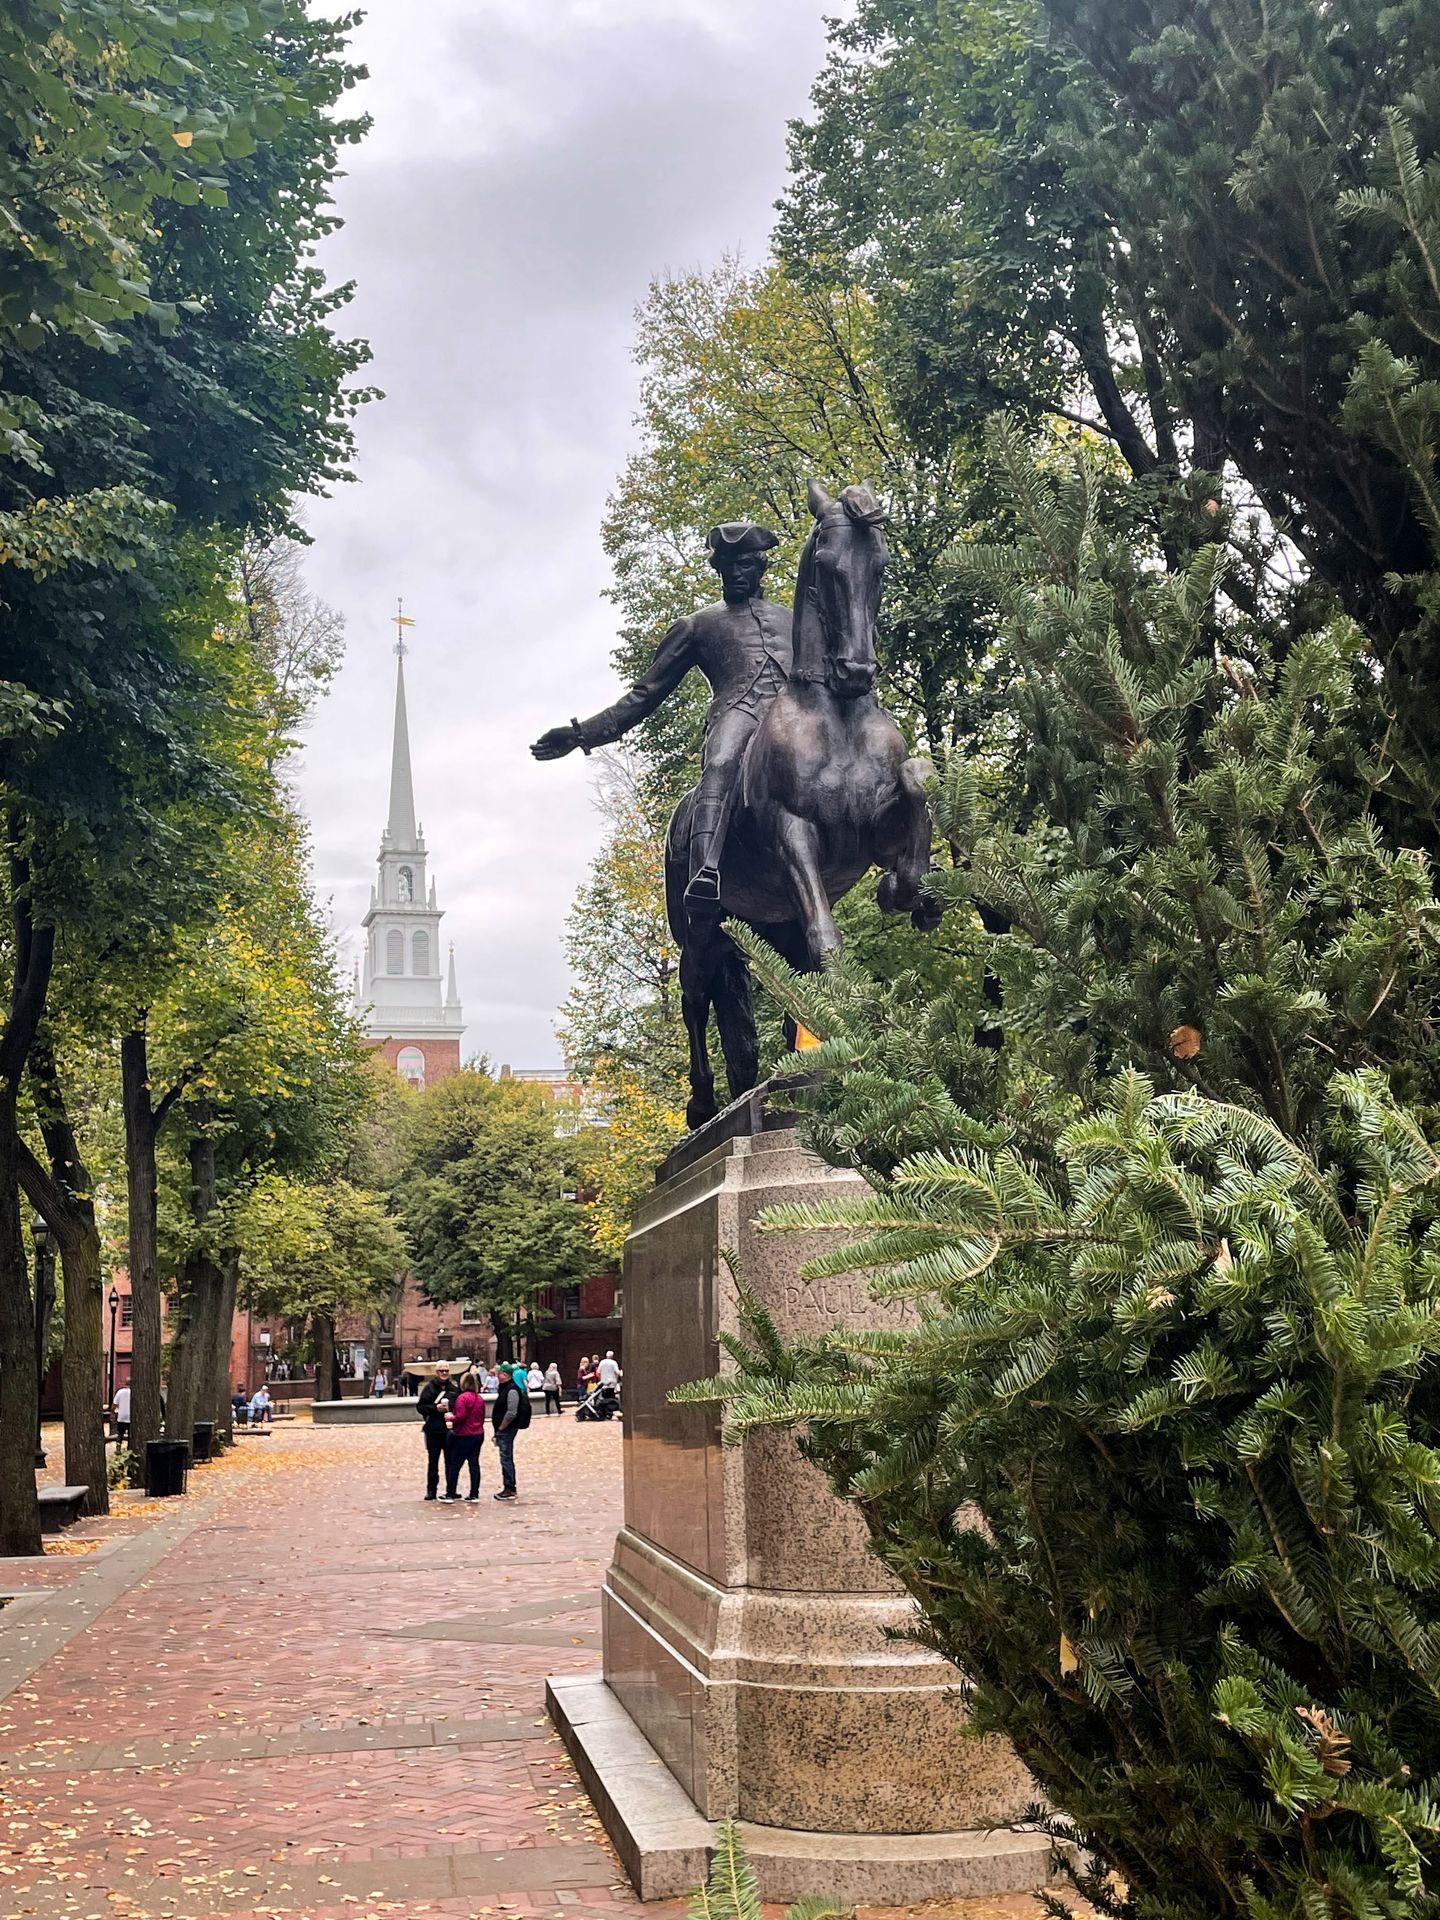 A statue of Paul Revere on a horse in the Paul Revere Mall